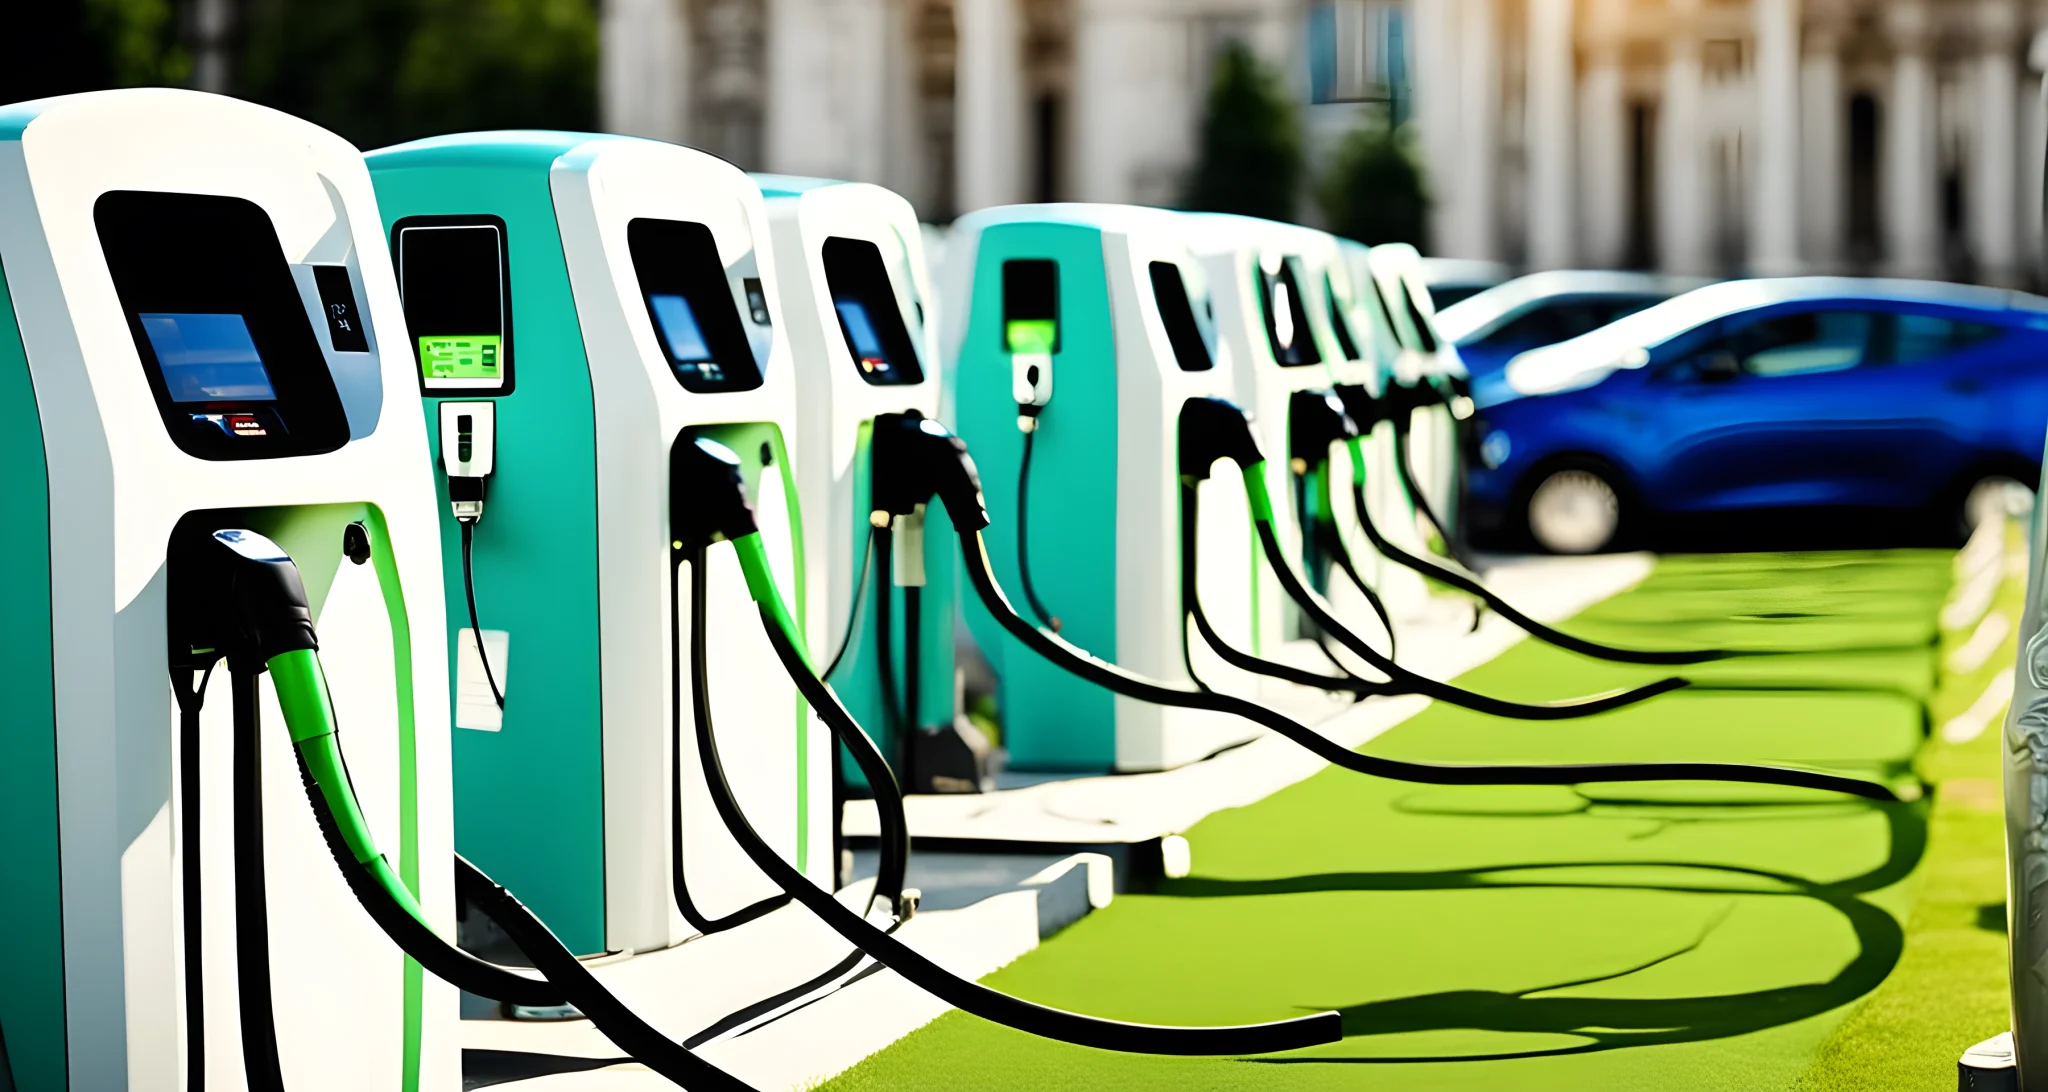 The image shows a row of electric vehicle charging stations at a car show.